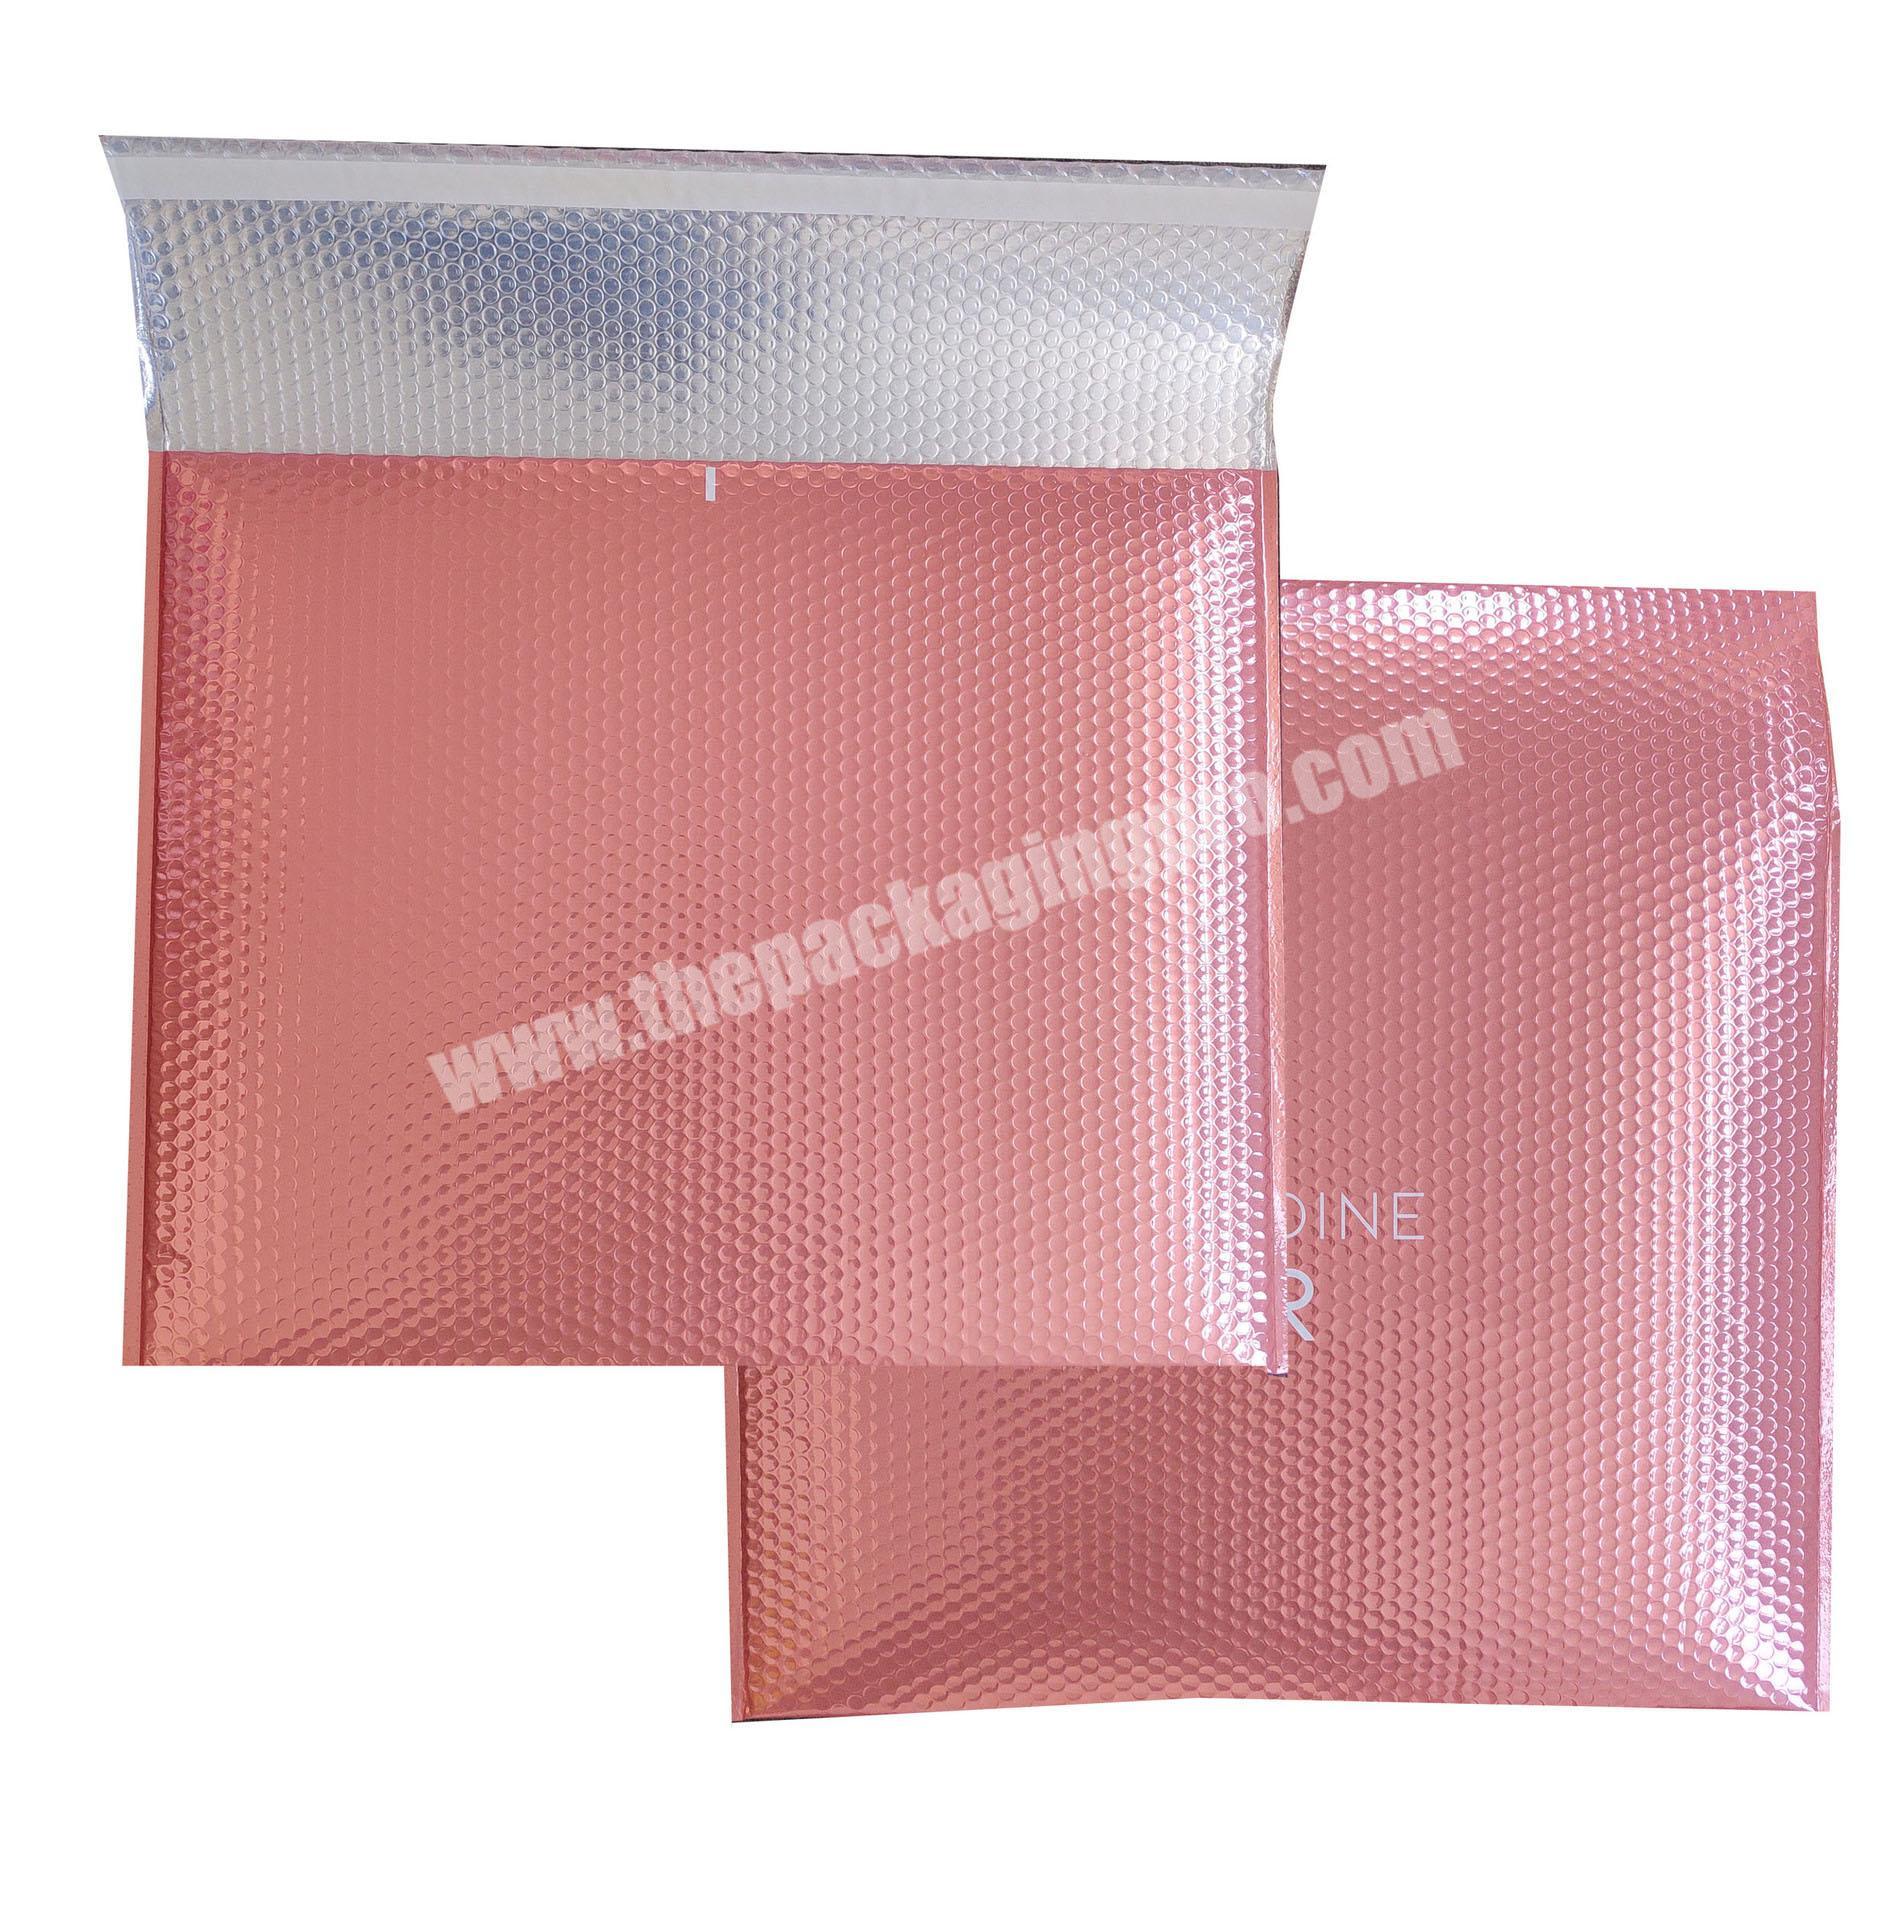 Self seal custom packing bubble mailers shipping envelope padded poly waterproof colored bubble bags